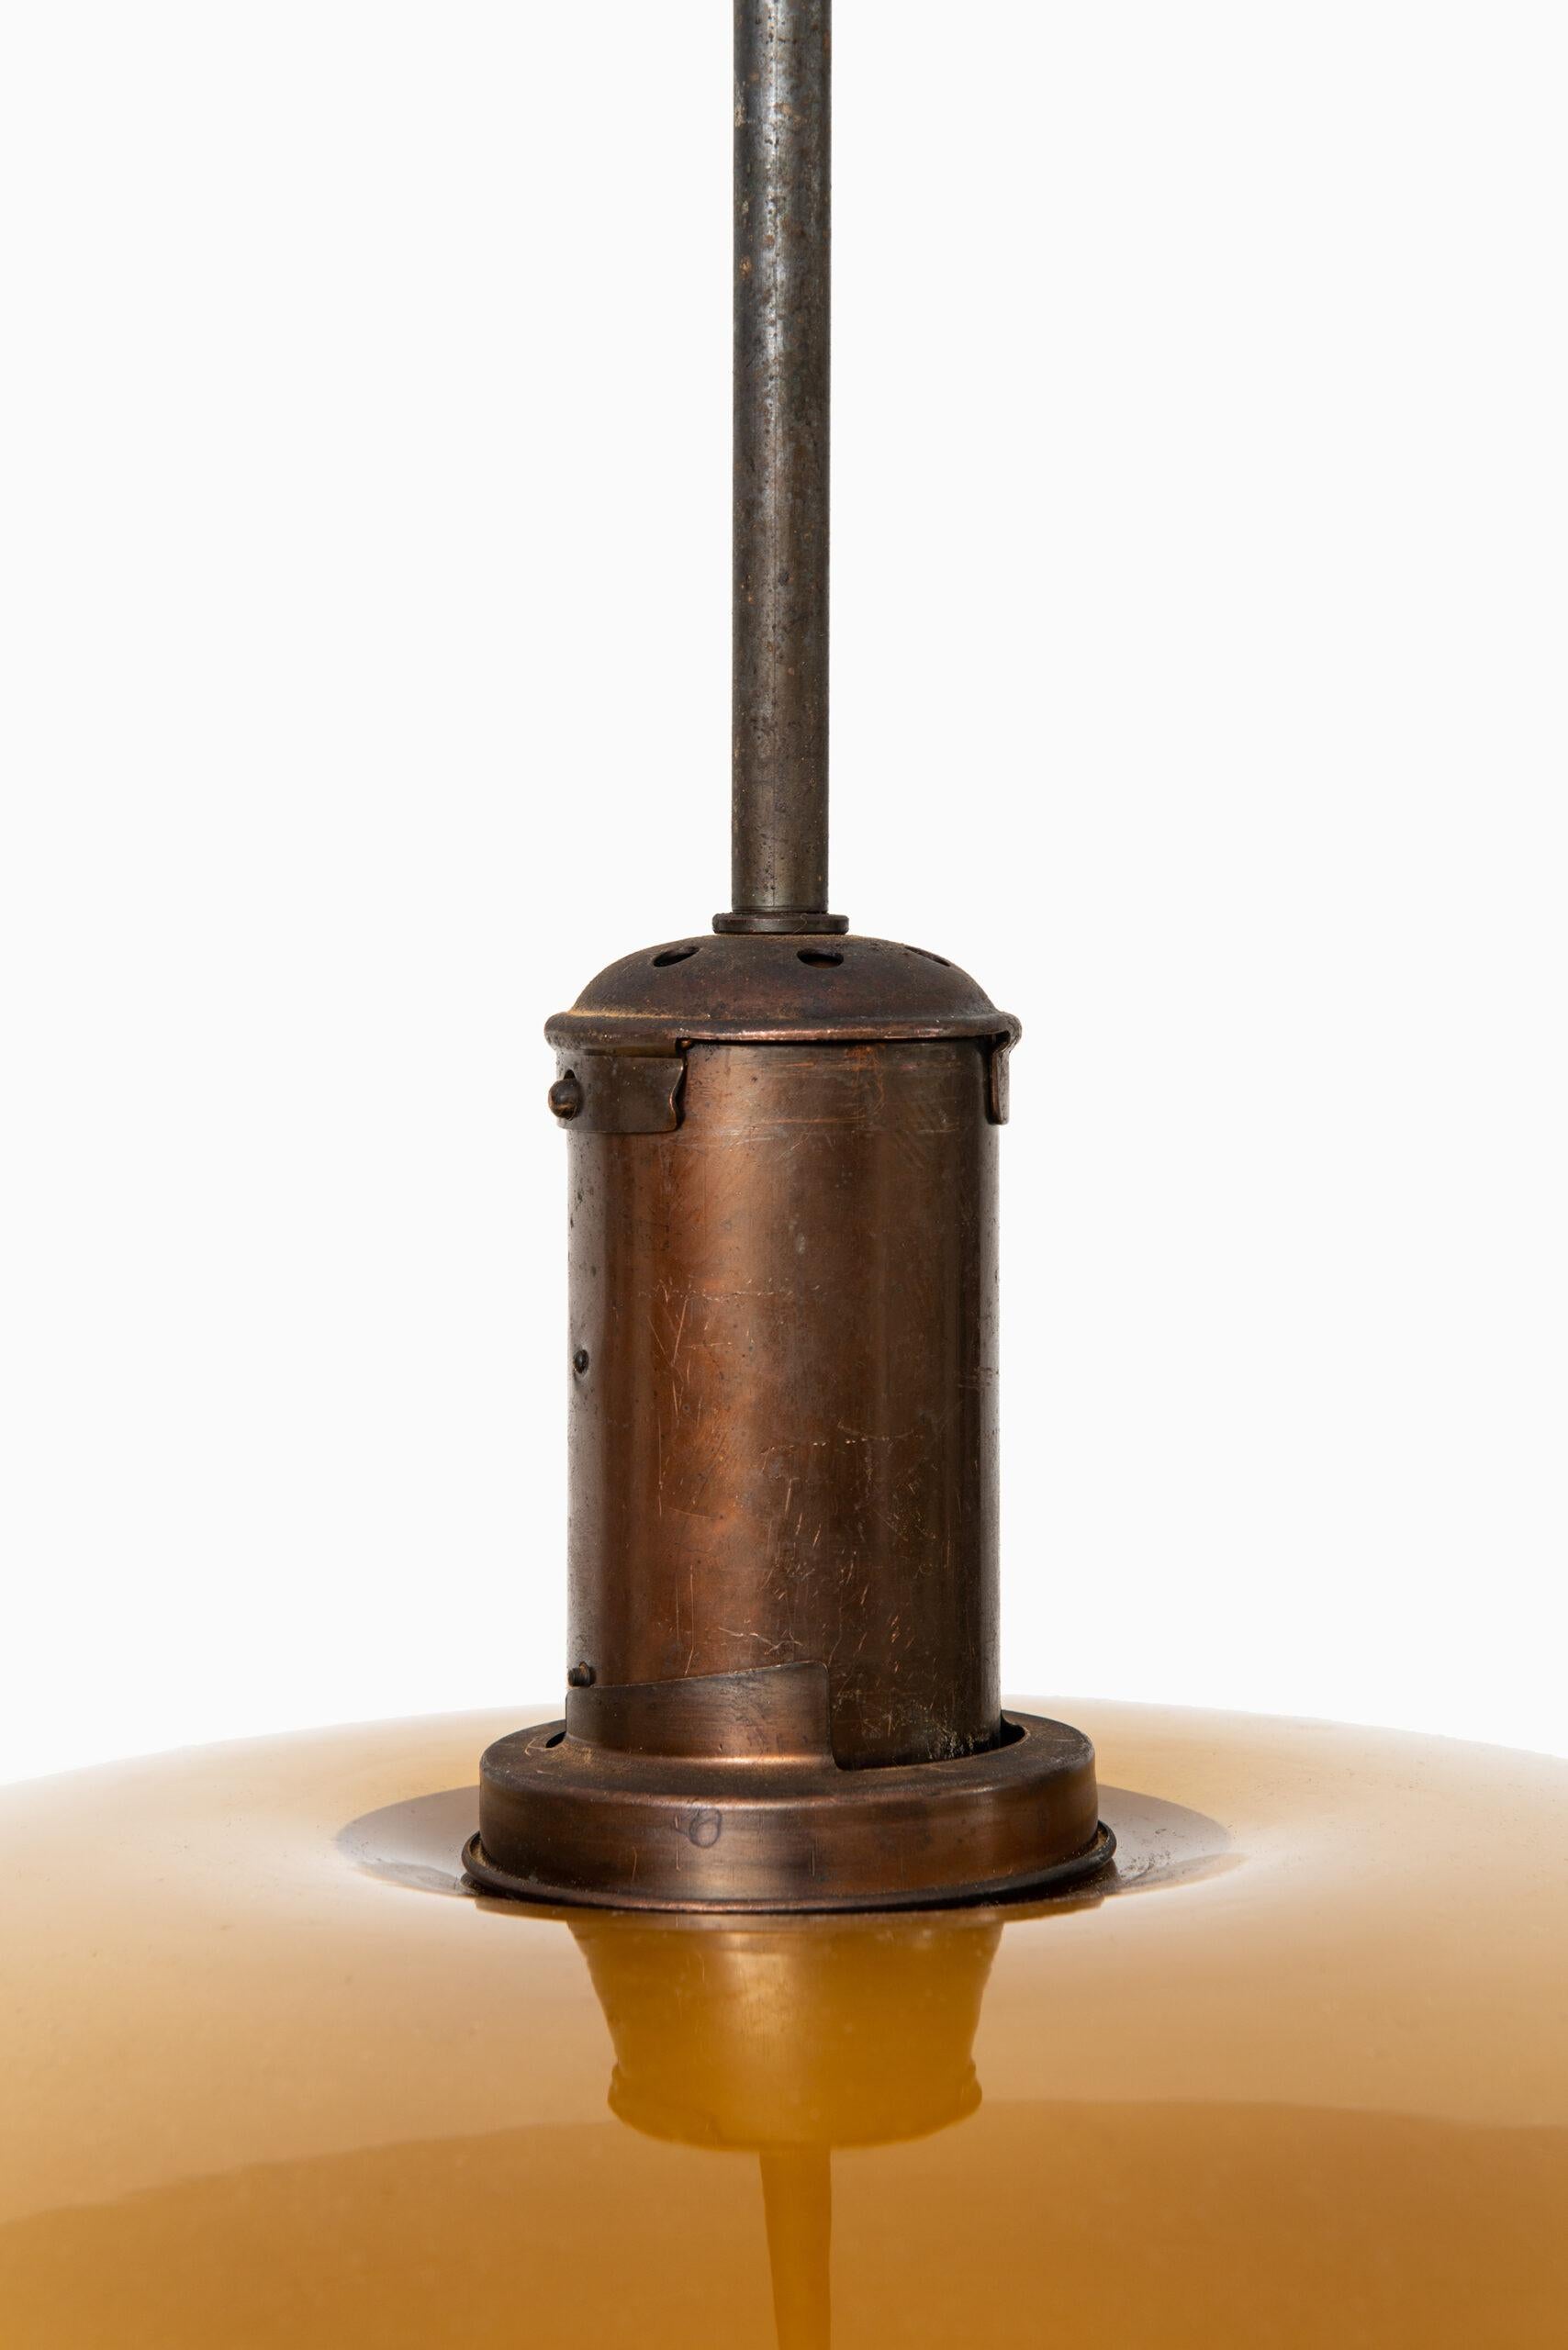 Early 20th Century Poul Henningsen Ceiling Lamp PH-5/5 Produced by Louis Poulsen in Denmark